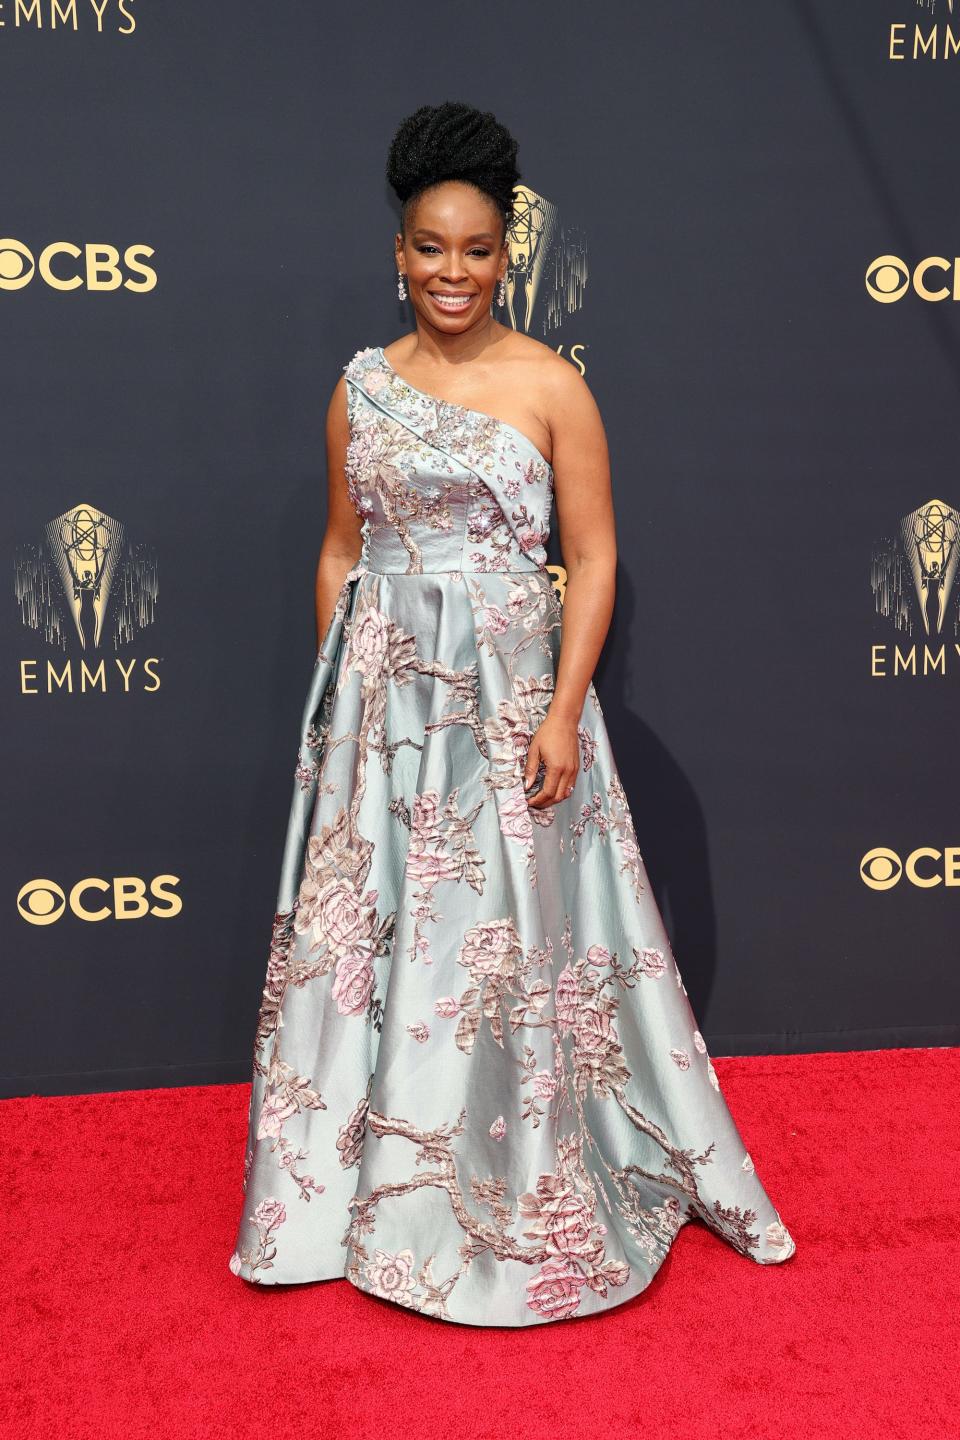 Amber Ruffin wears a one-strap dress on the Emmys red carpet.